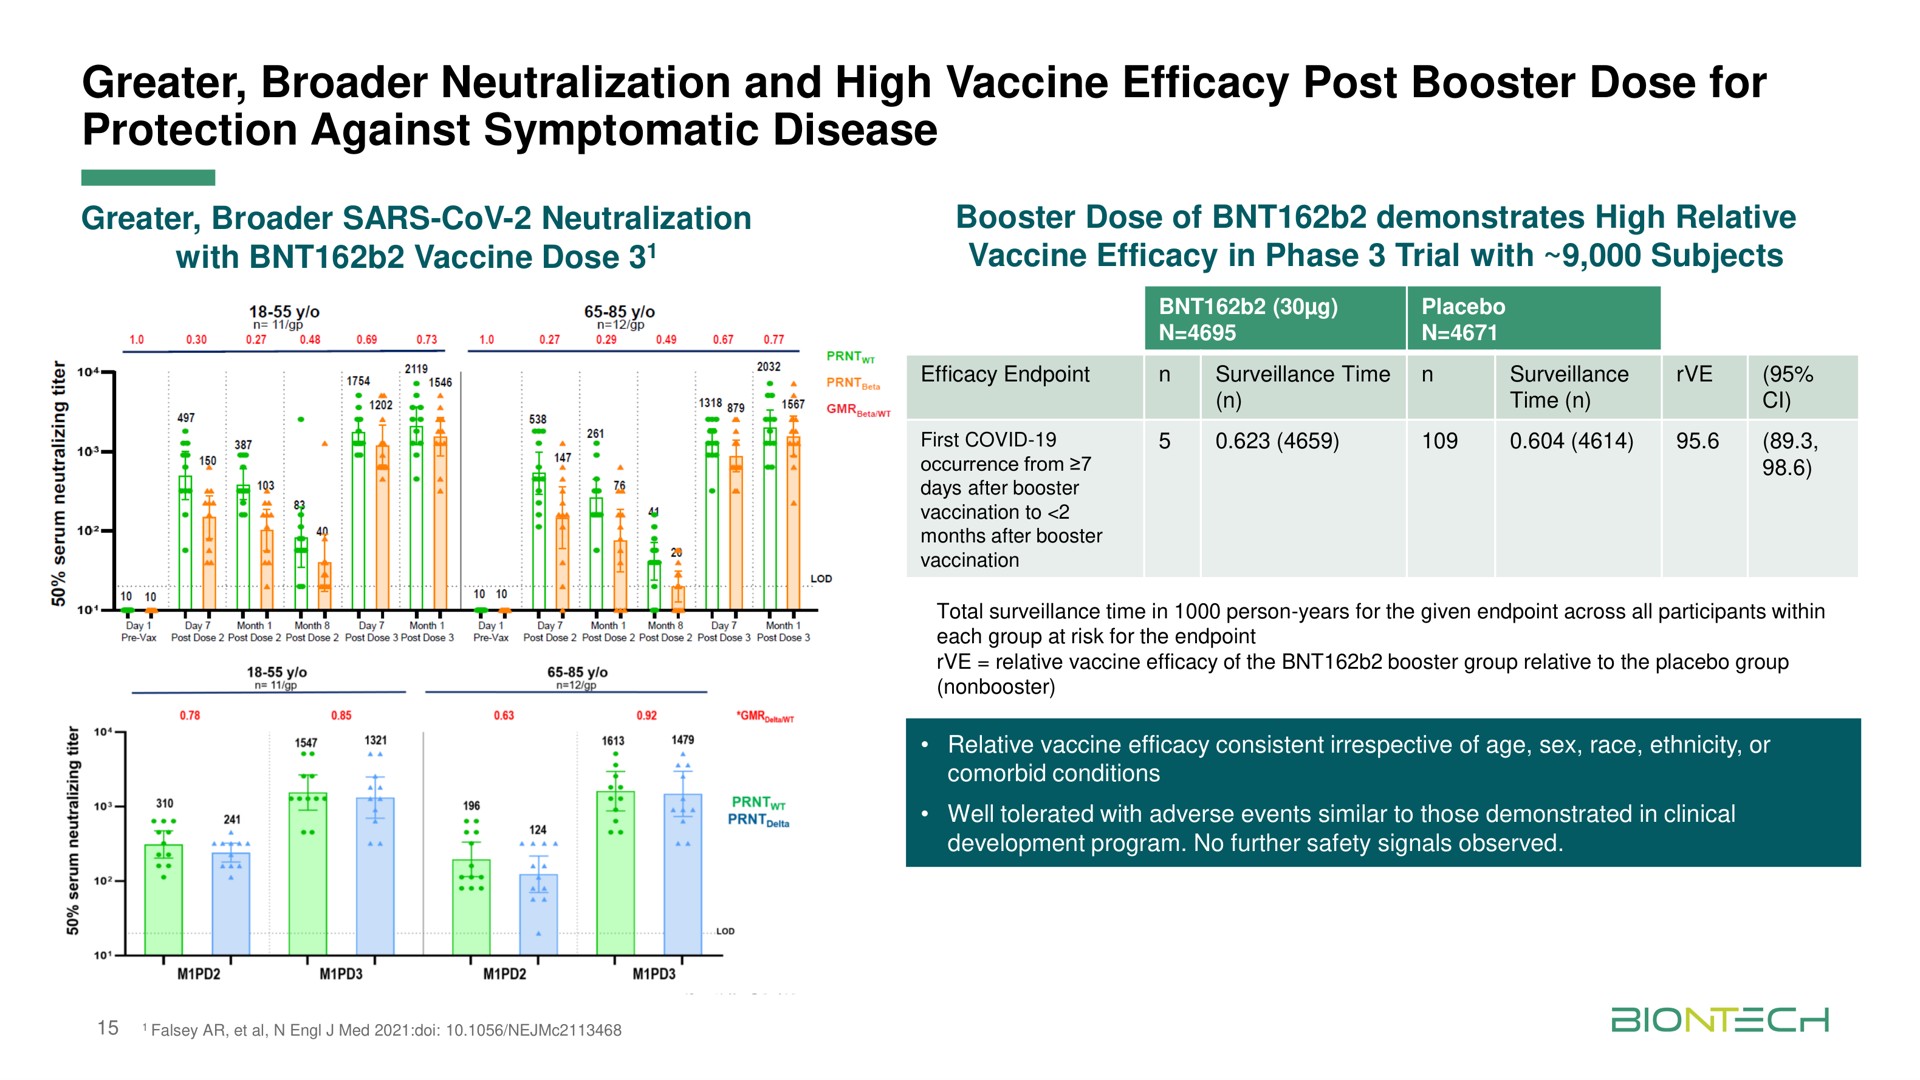 greater neutralization and high vaccine efficacy post booster dose for protection against symptomatic disease | BioNTech